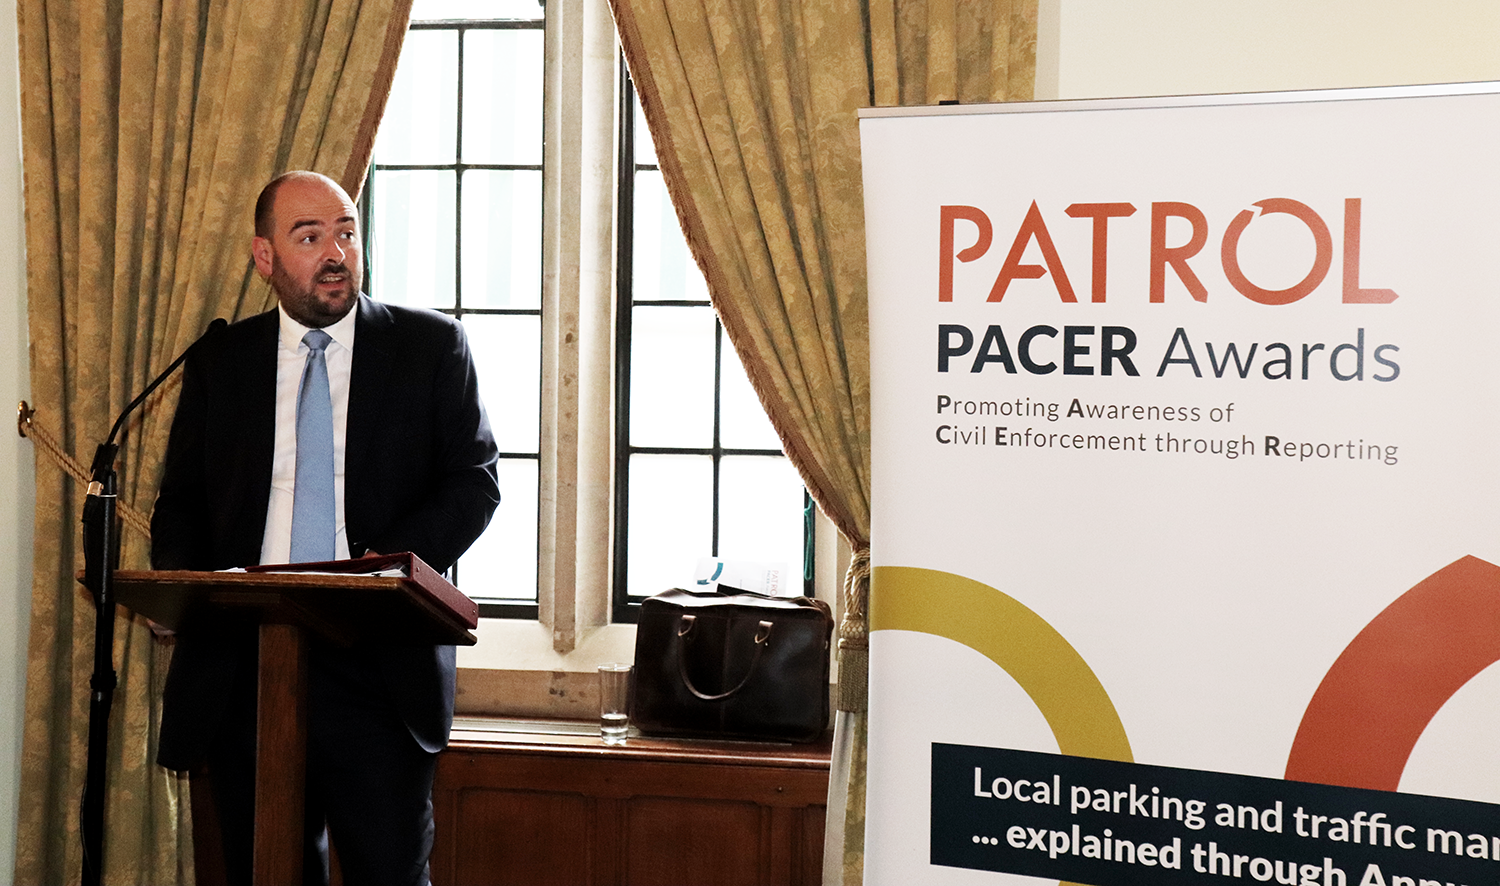 Minister Richard Holden of the Department for Transport speaks at the 2023 PATROL PACER Awards